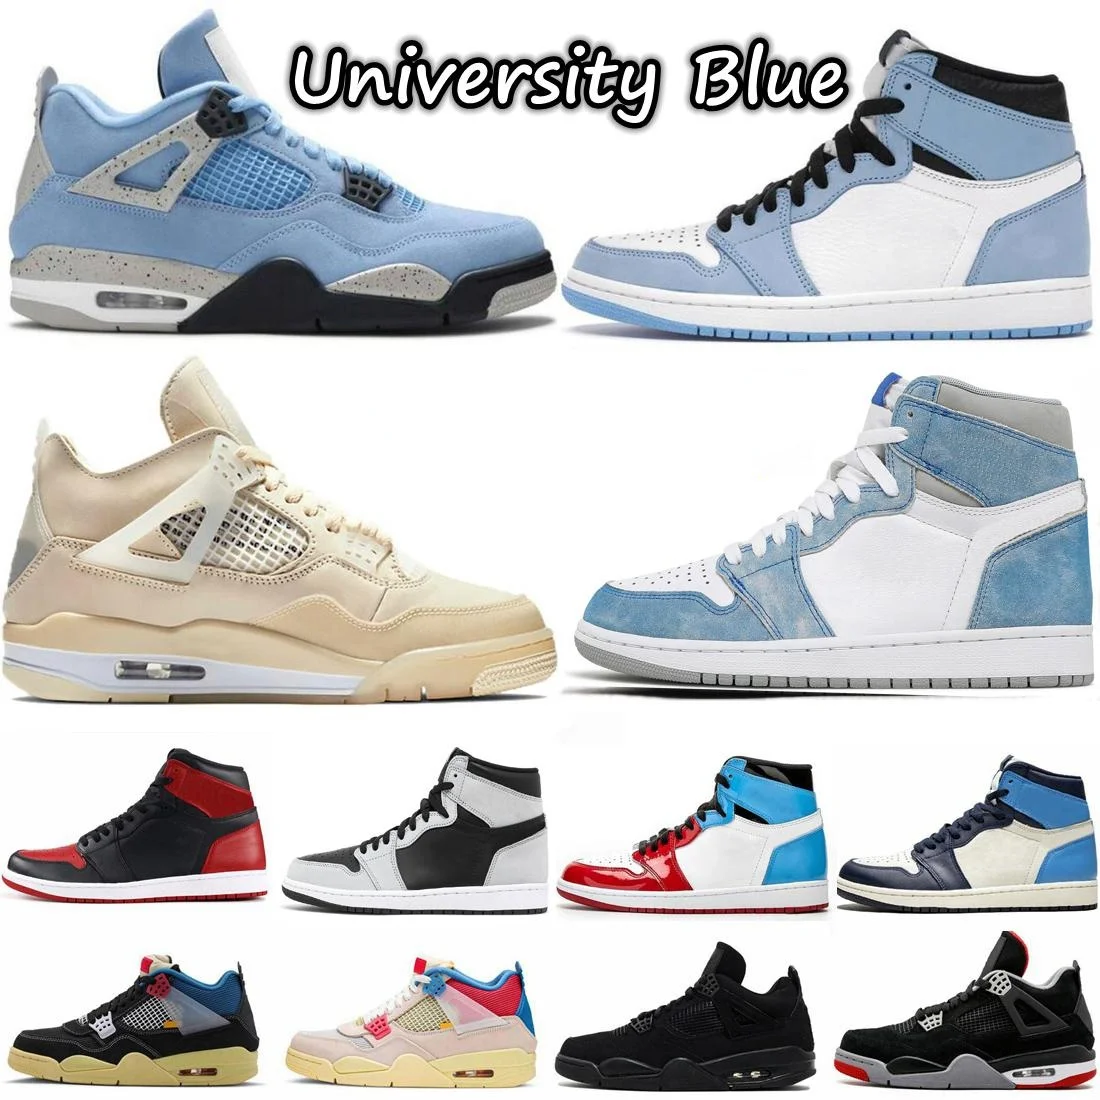 

Mens 1s Hyper Royal Shoes Obsidian UNC 4s Sail University Twist What The Basketball Shoe Oreo Cat Bred Guava Ice Sneakers